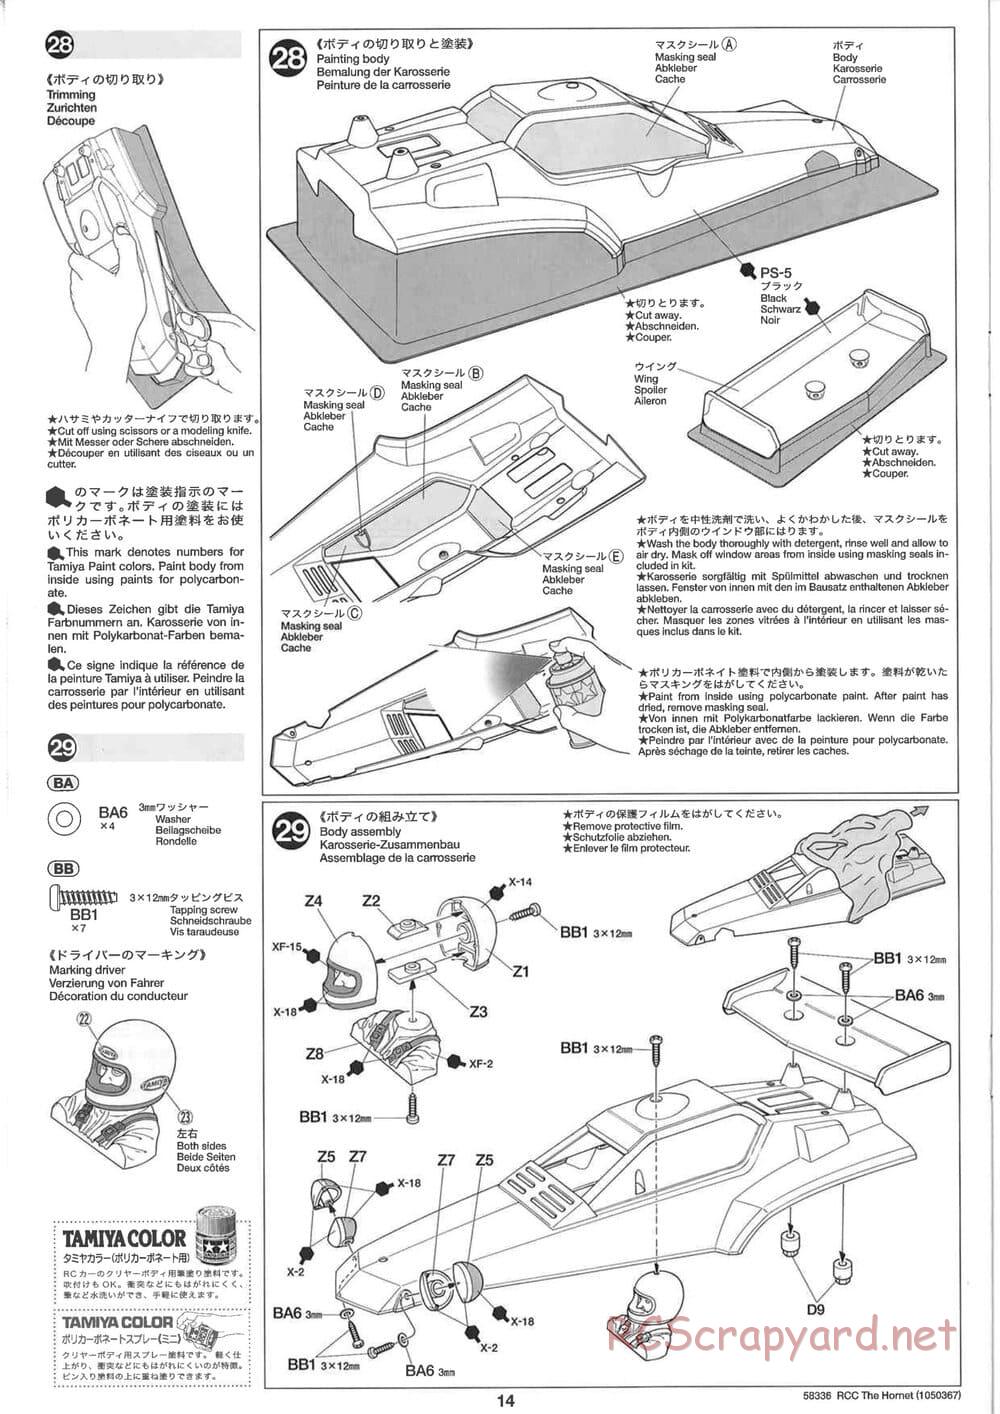 Tamiya - The Hornet (2004) - GH Chassis - Manual - Page 14